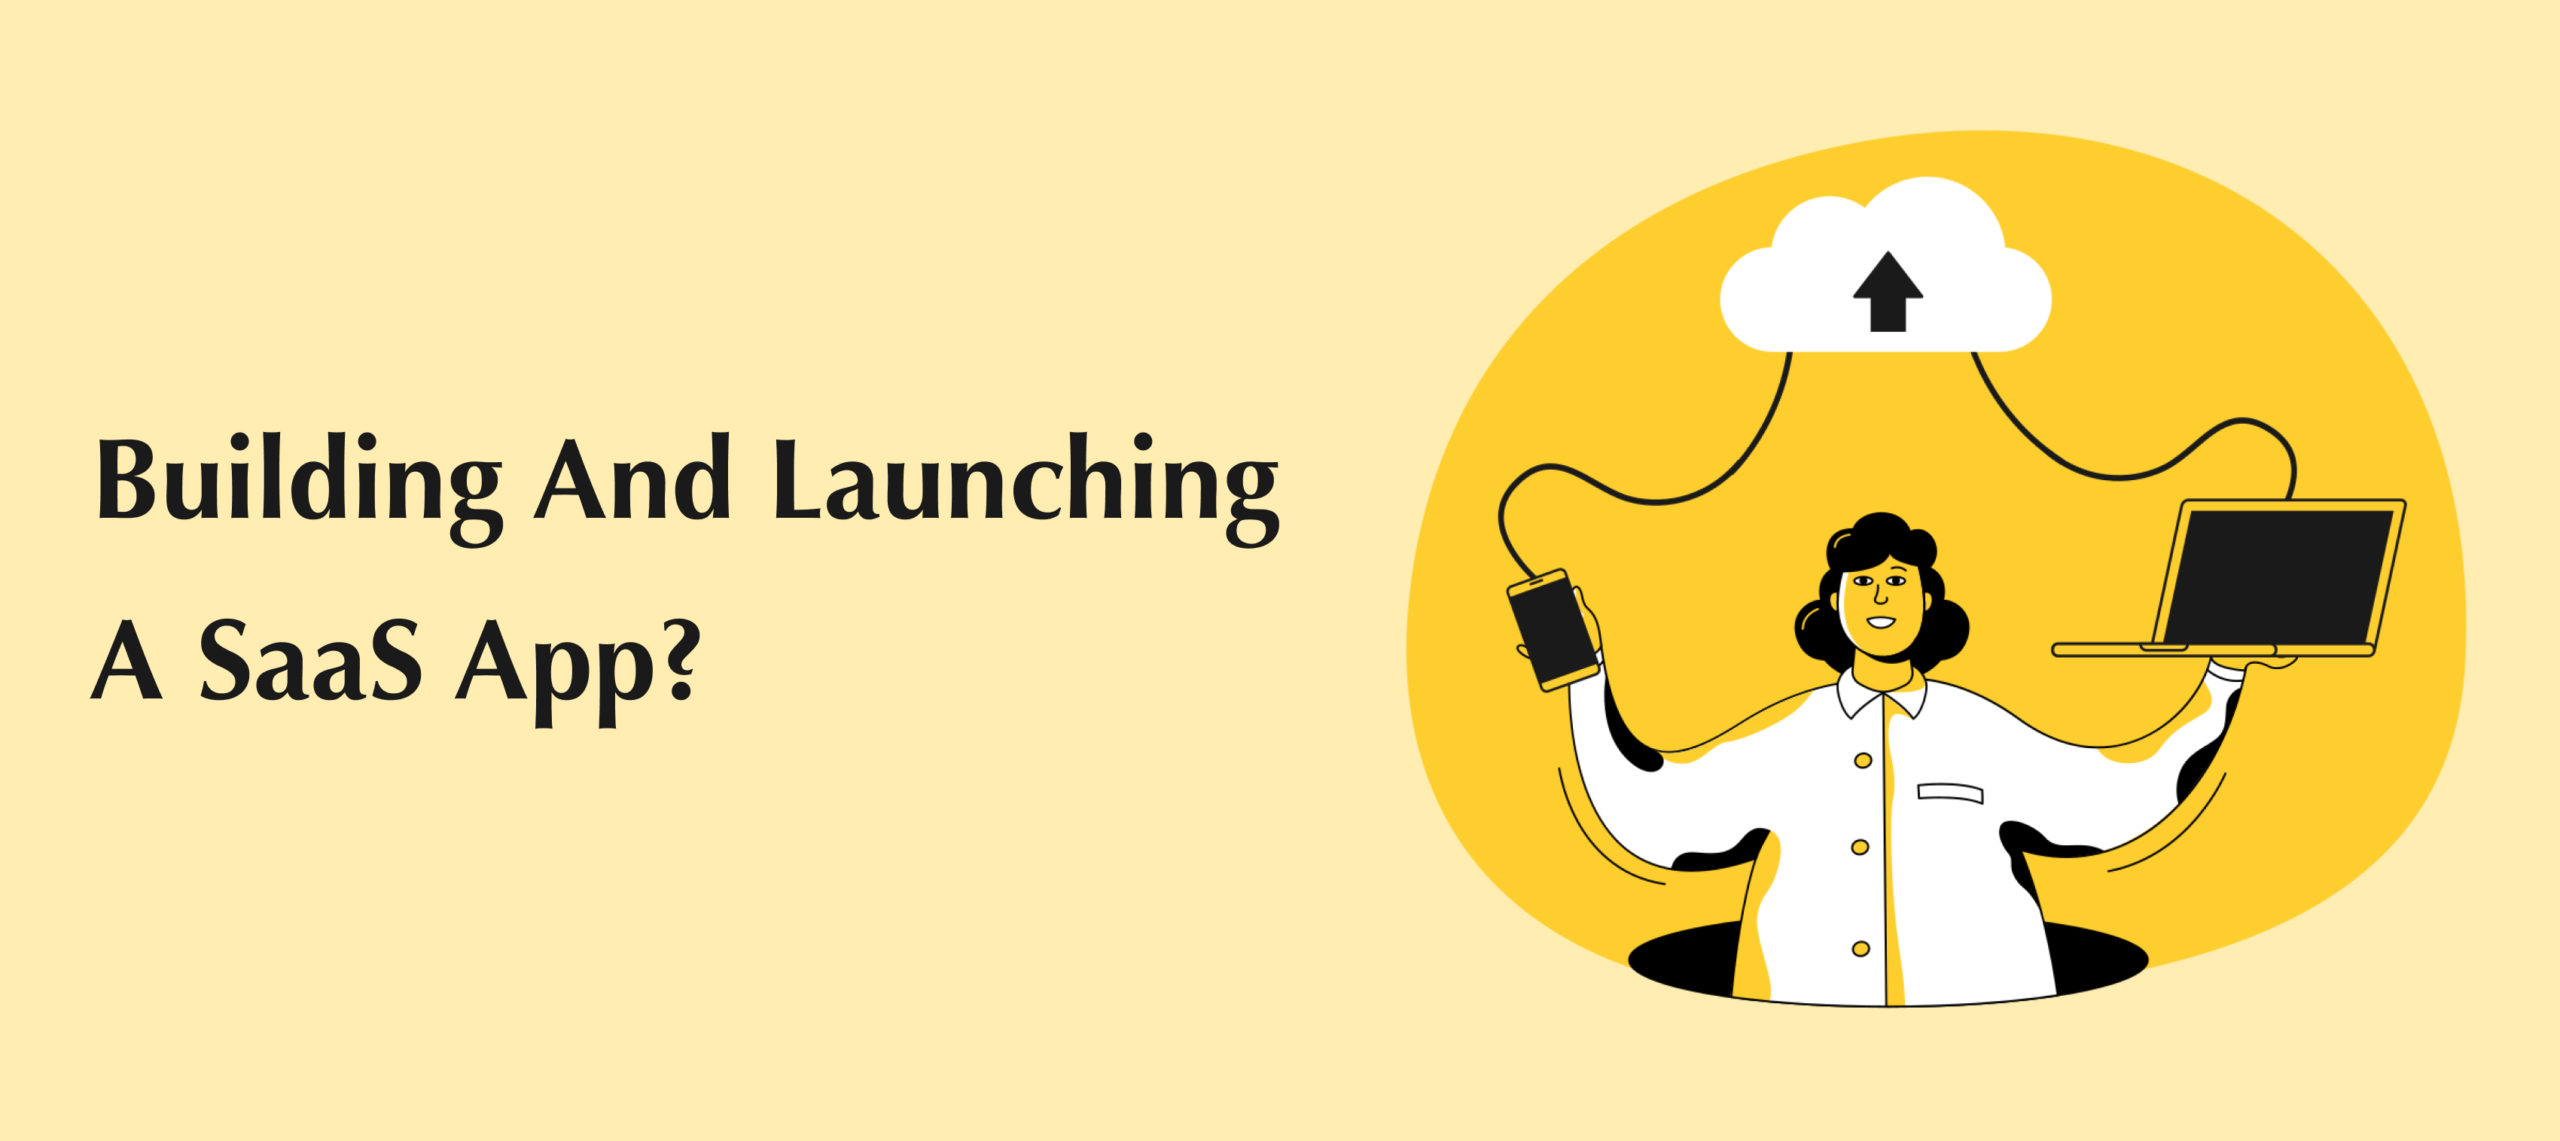  Building And Launching A SaaS App? How To Set Yourself Up For Success